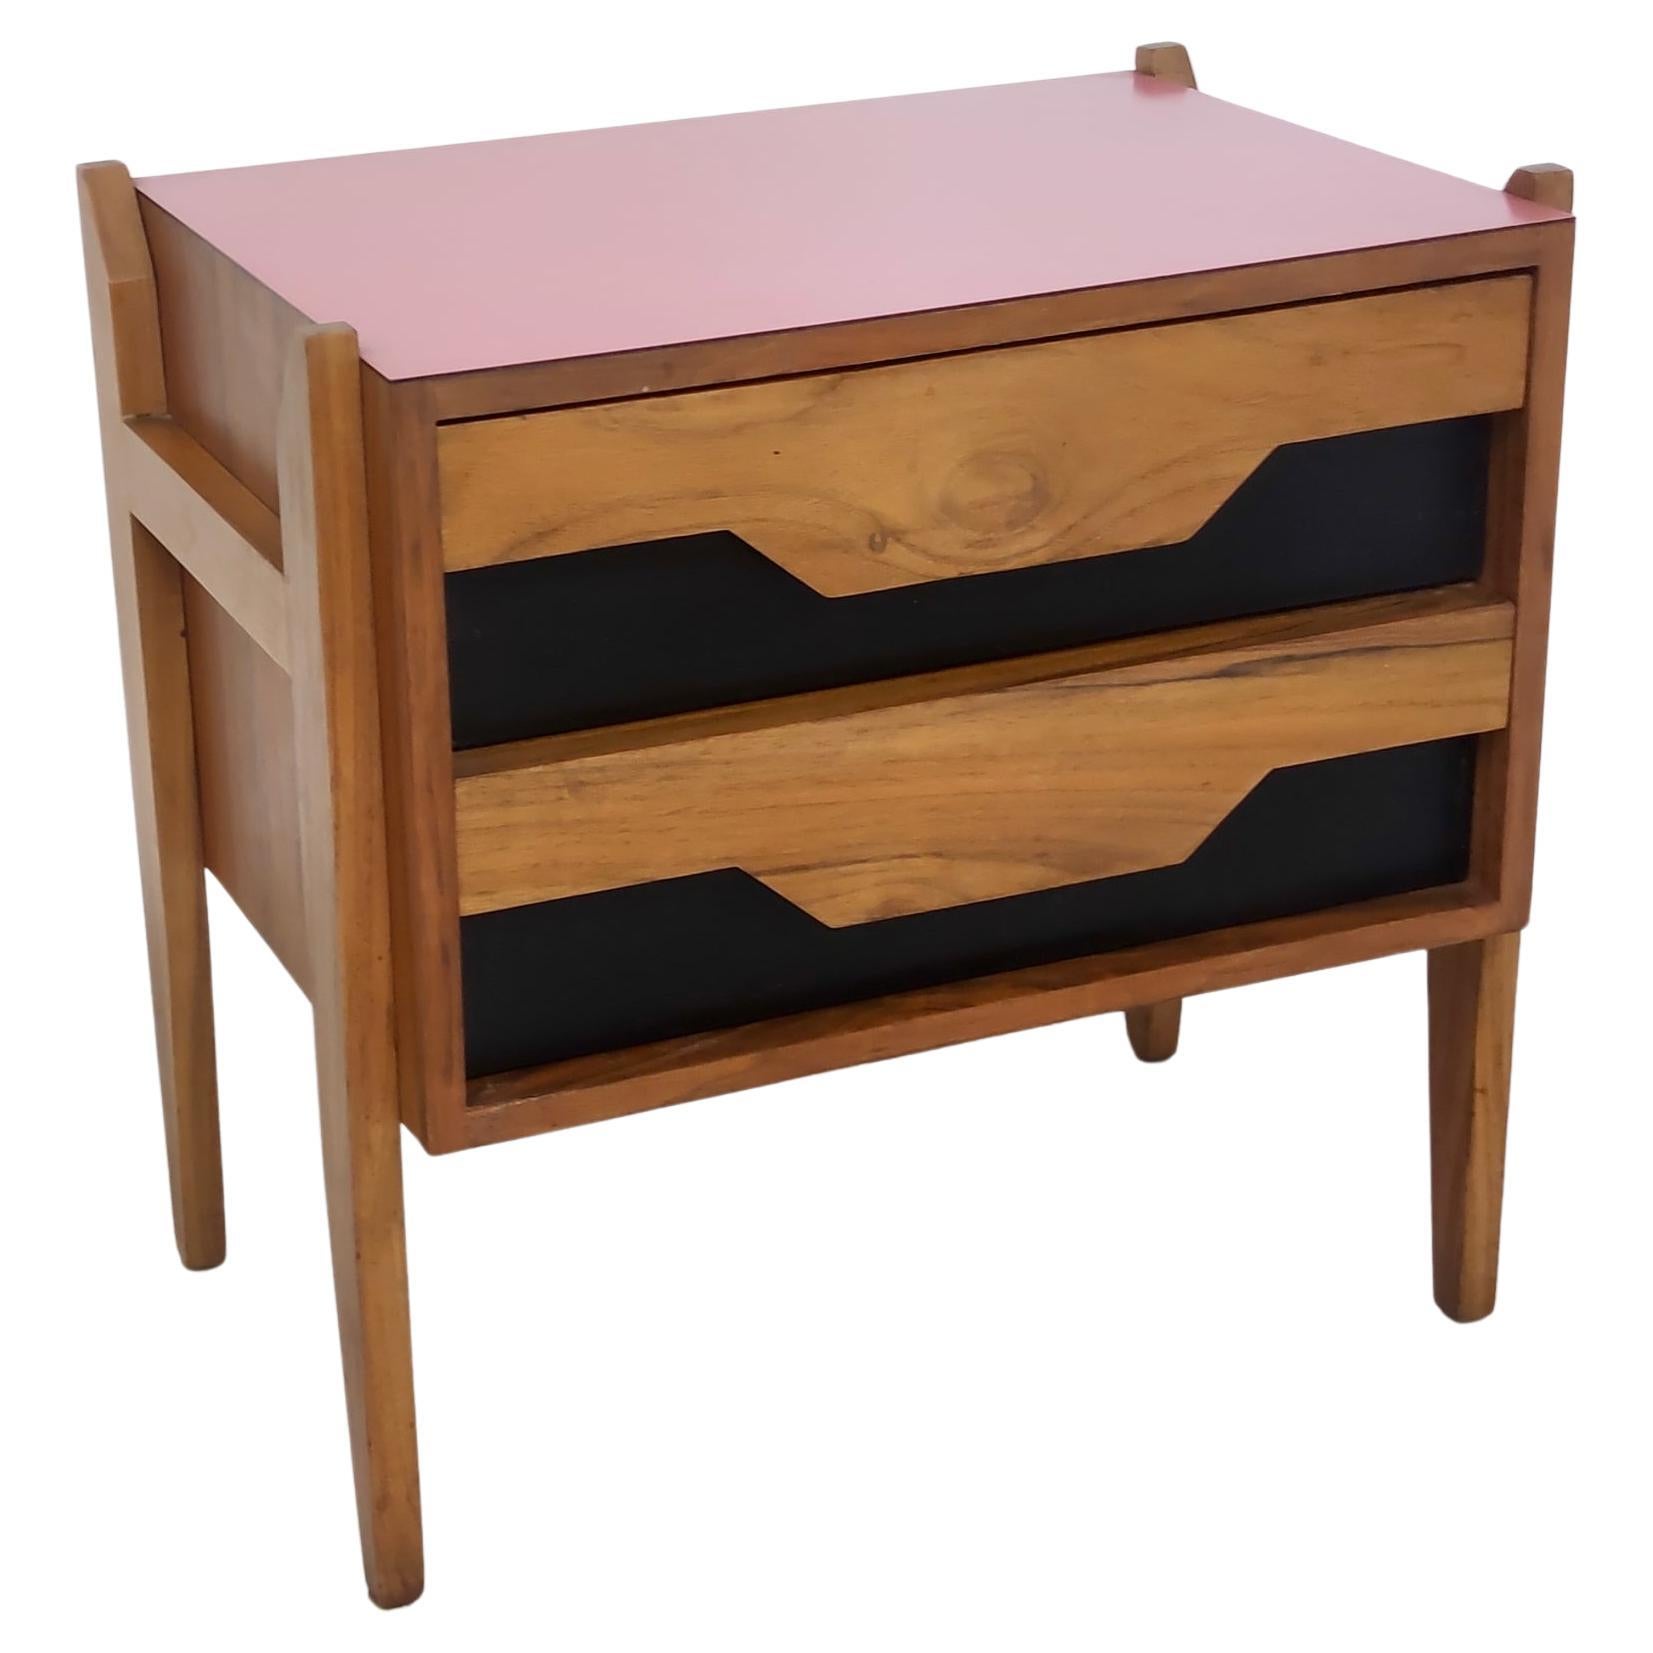 Vintage Walnut Nightstand attr. to Ico Parisi with a Pink Top and Black Drawers For Sale